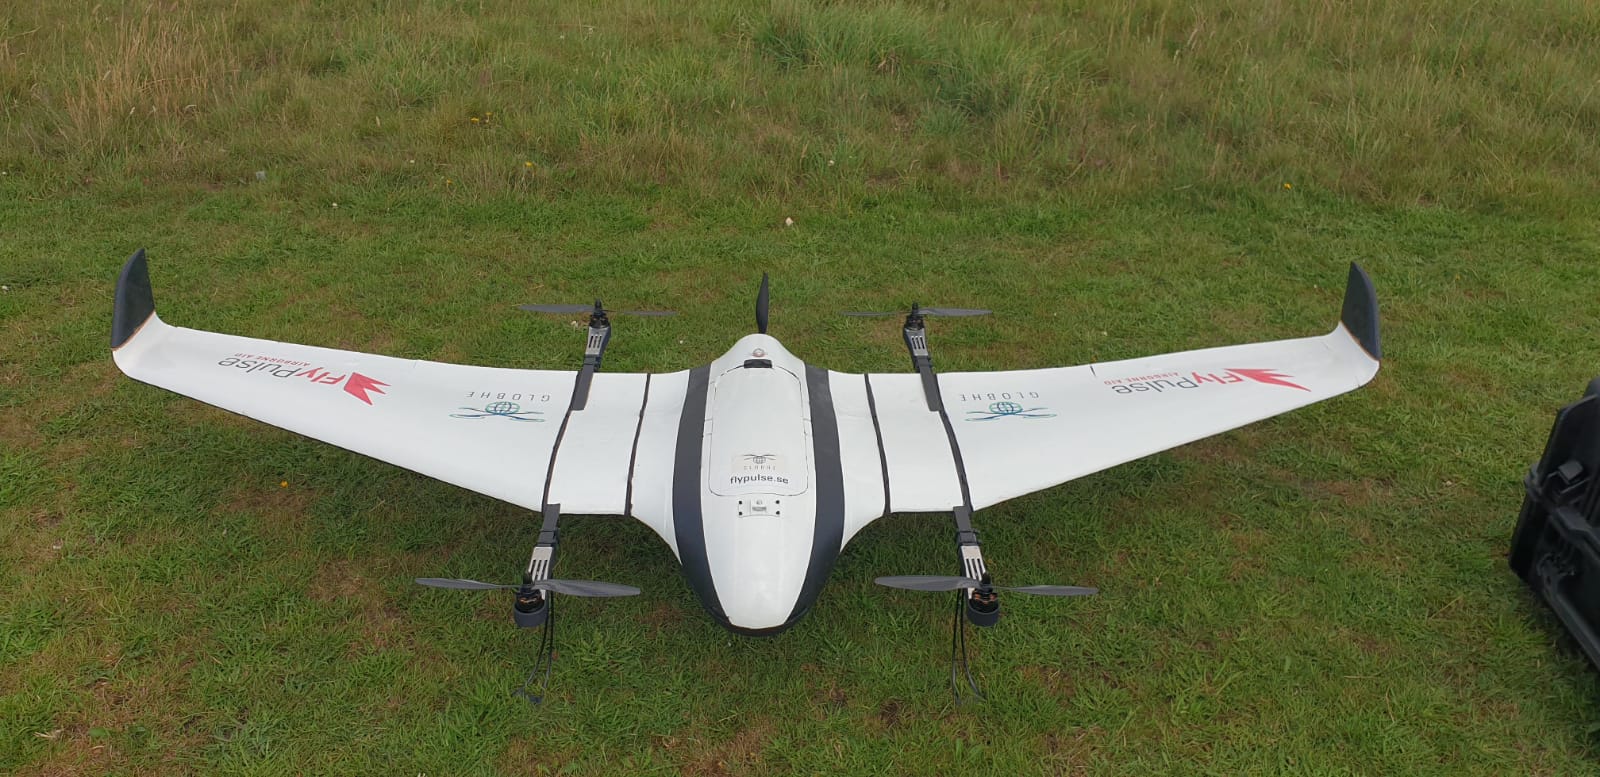 New research projects to explore use of drones for medical delivery purposes